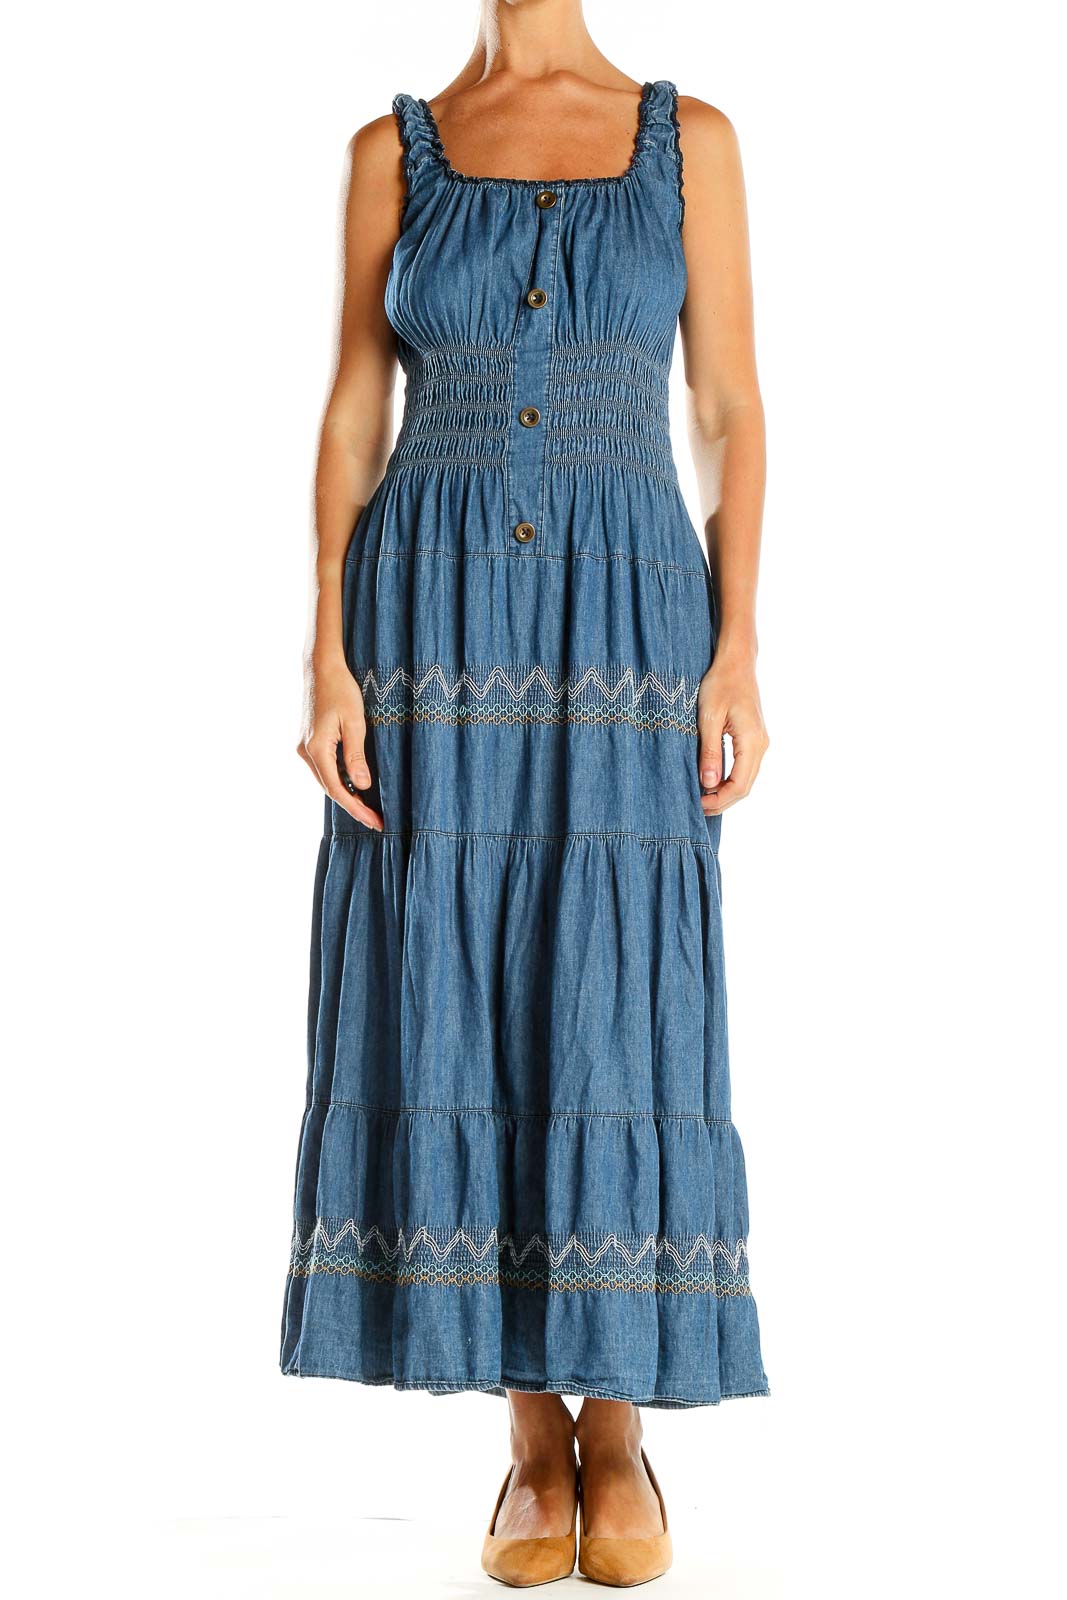 Blue Bohemian Fit & Flare Maxi Dress Front